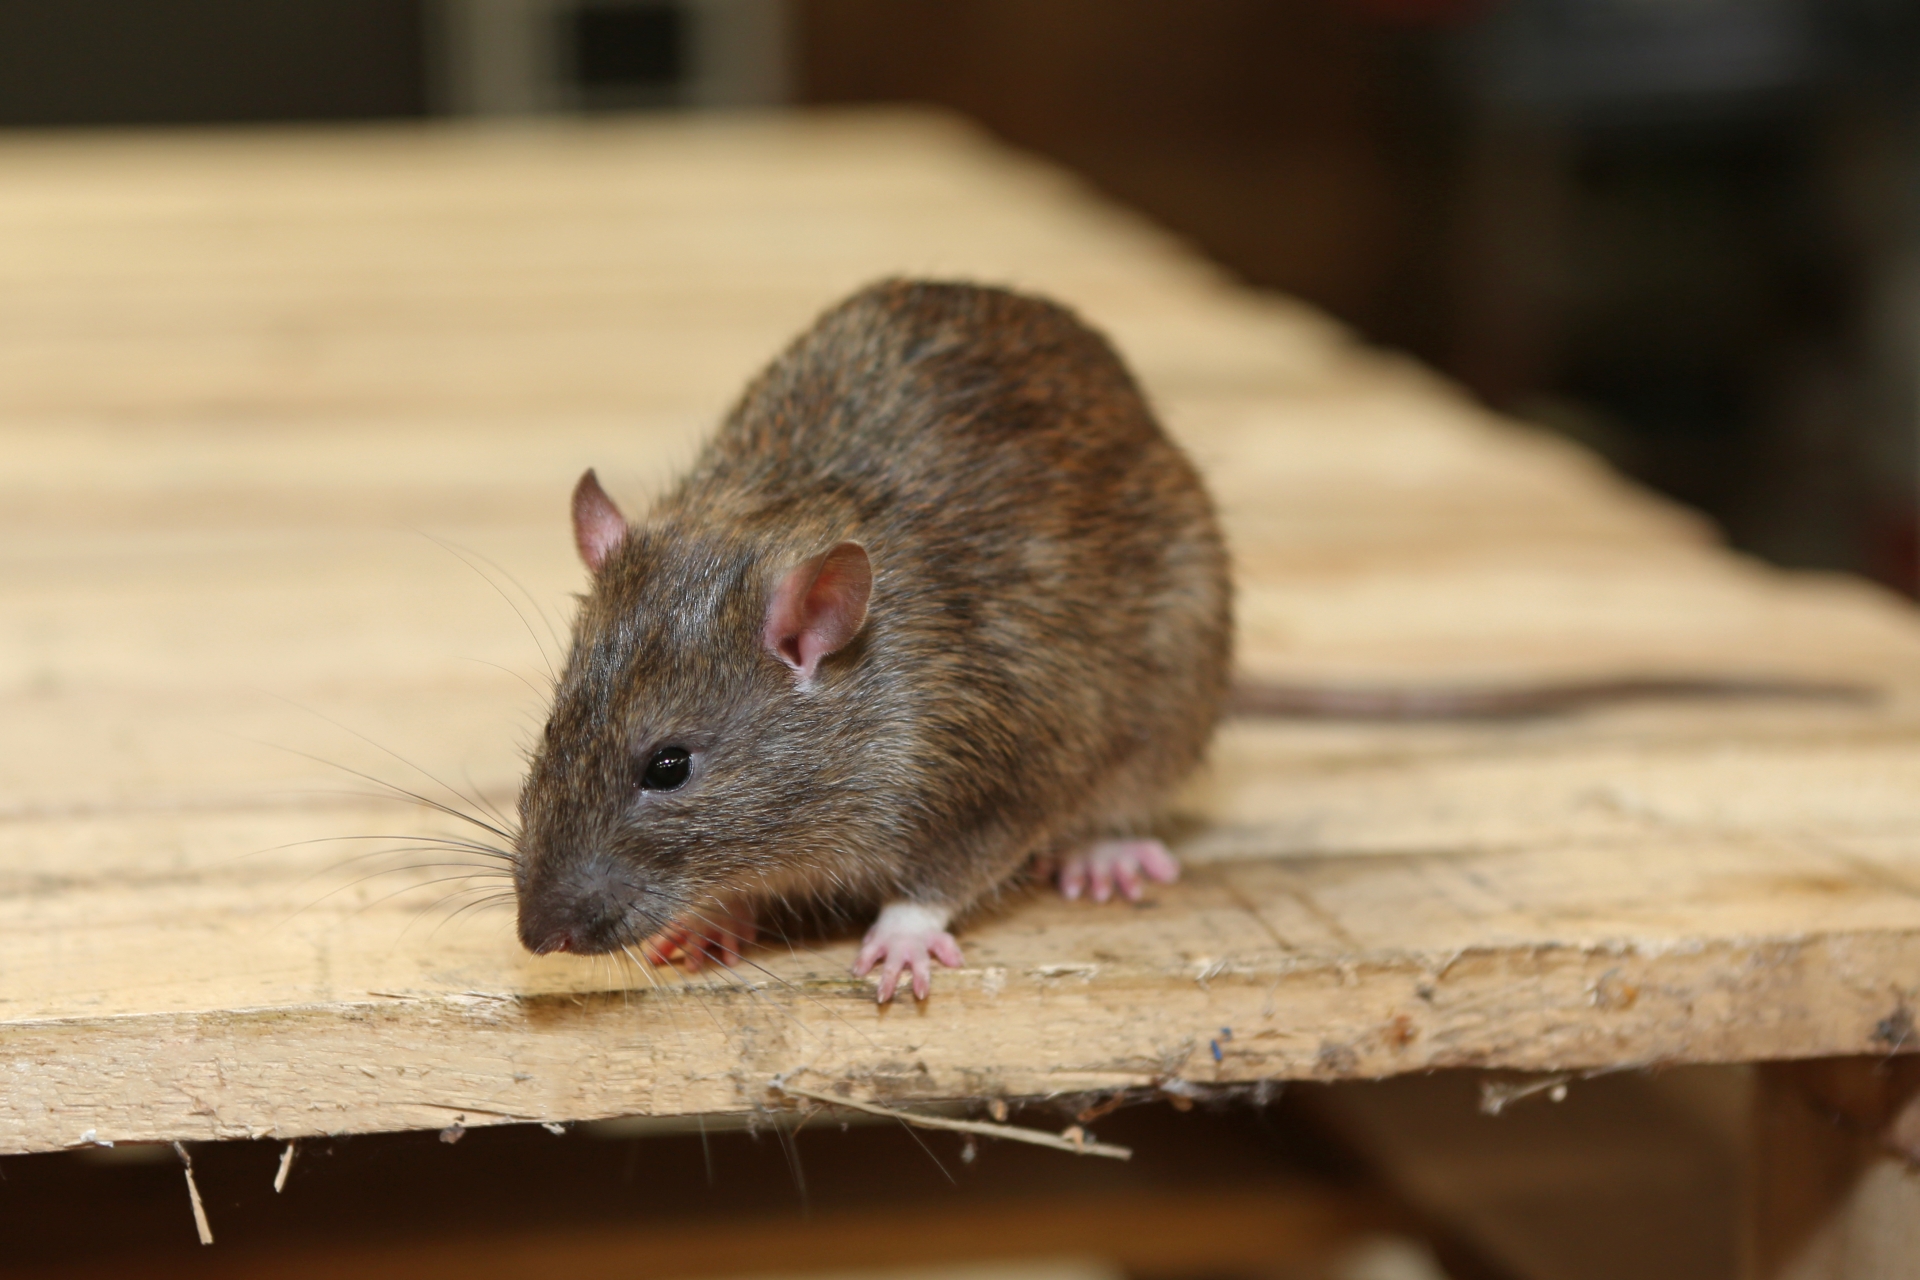 Rat Infestation, Pest Control in Clerkenwell, Finsbury, Barbican, EC1. Call Now 020 8166 9746